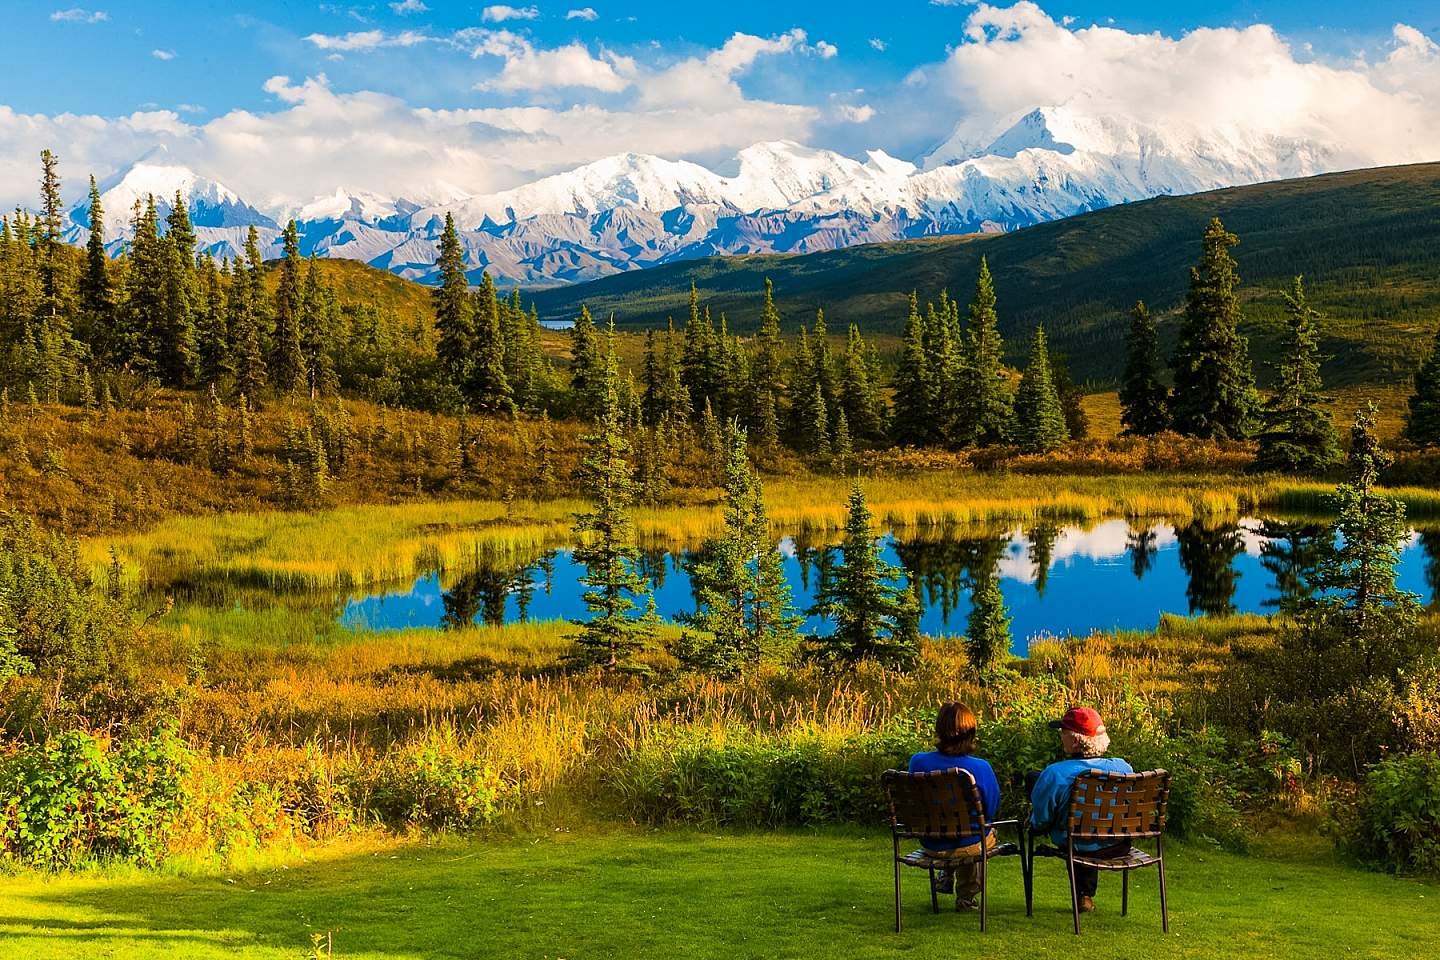 Lies in the heart of the expanded boundaries of Denali National Park